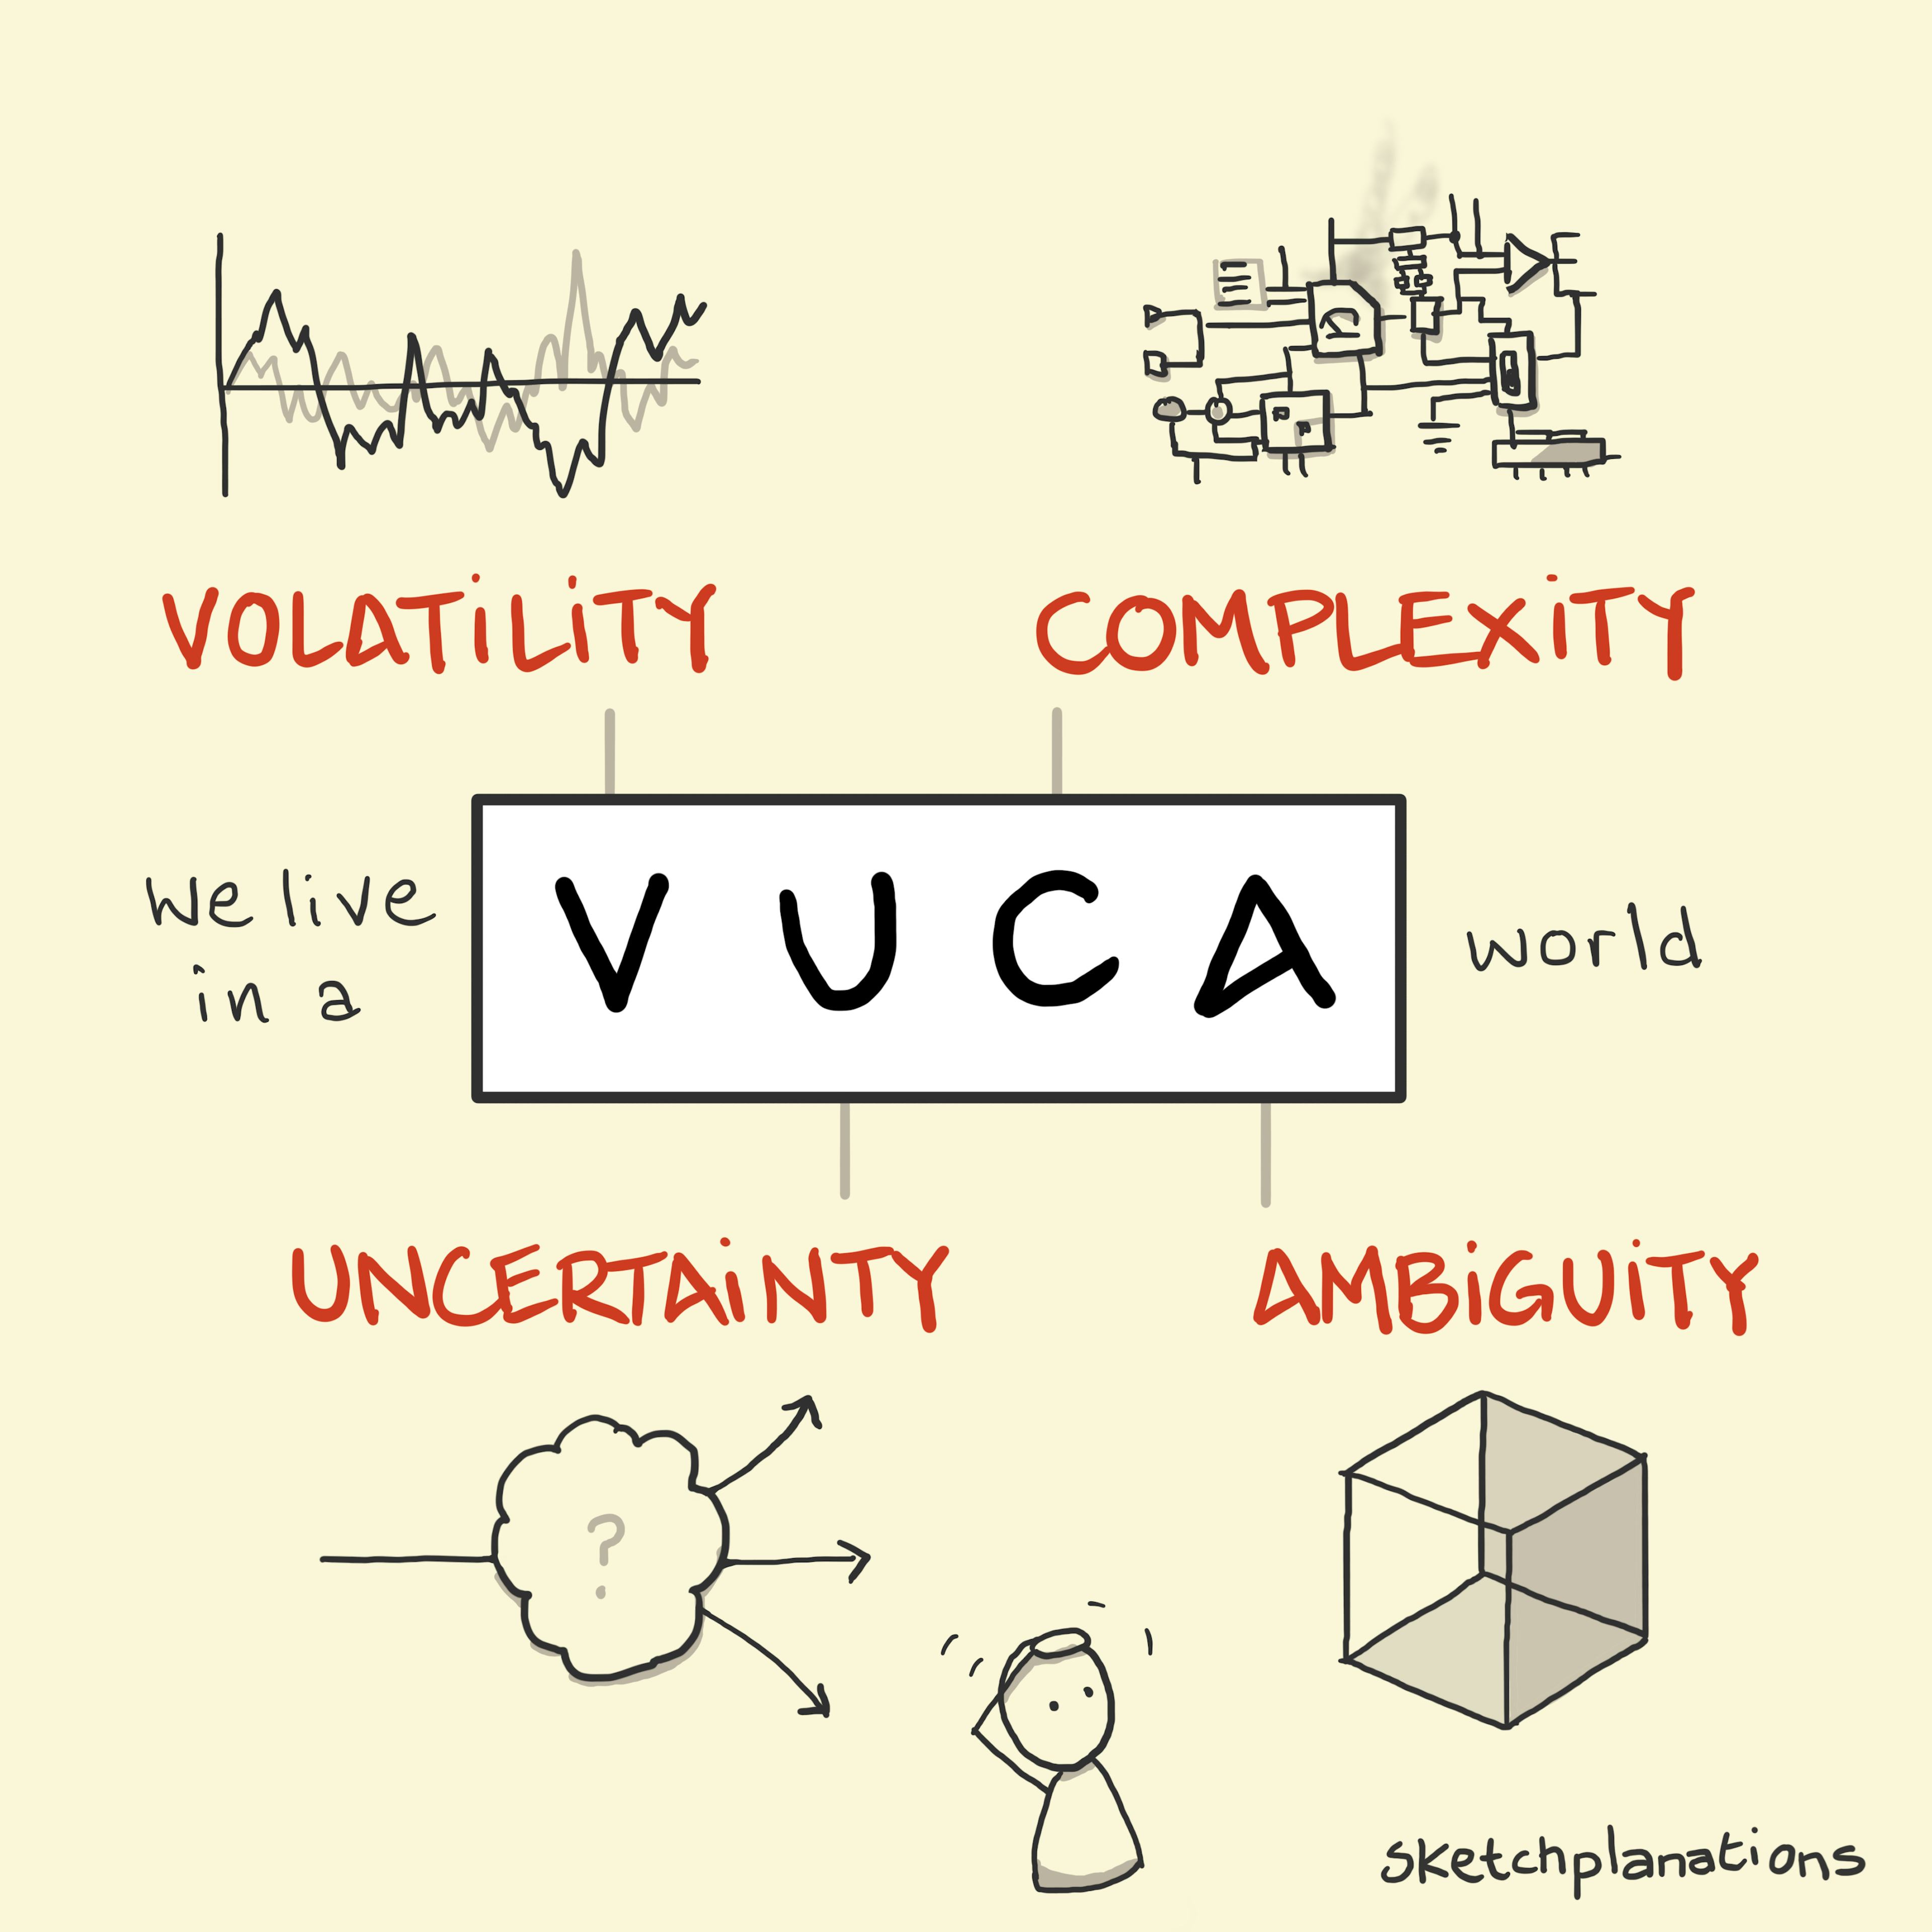 VUCA illustration: Examples of Volatility (a stock-like chart), Complexity (a circuit-like confusion), Uncertainty (a direction splitting into 3) and a person sweating over Ambiguity (a Necker cube).